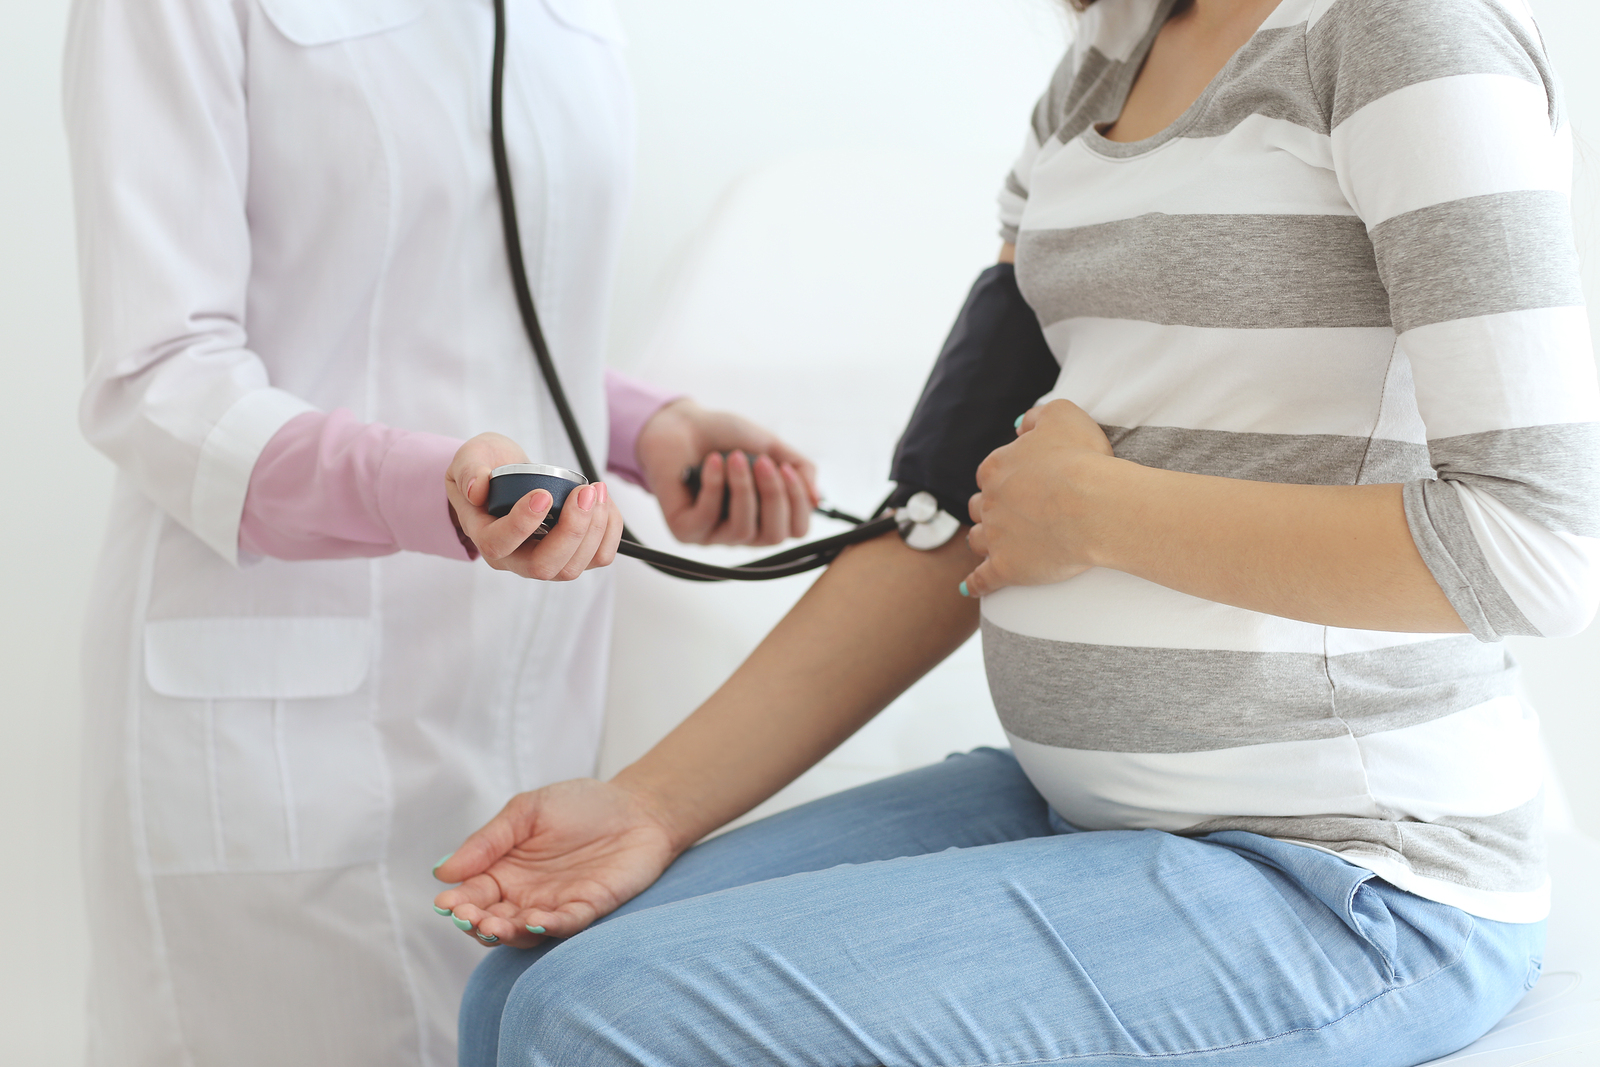 How to Manage High Blood Pressure During Pregnancy?